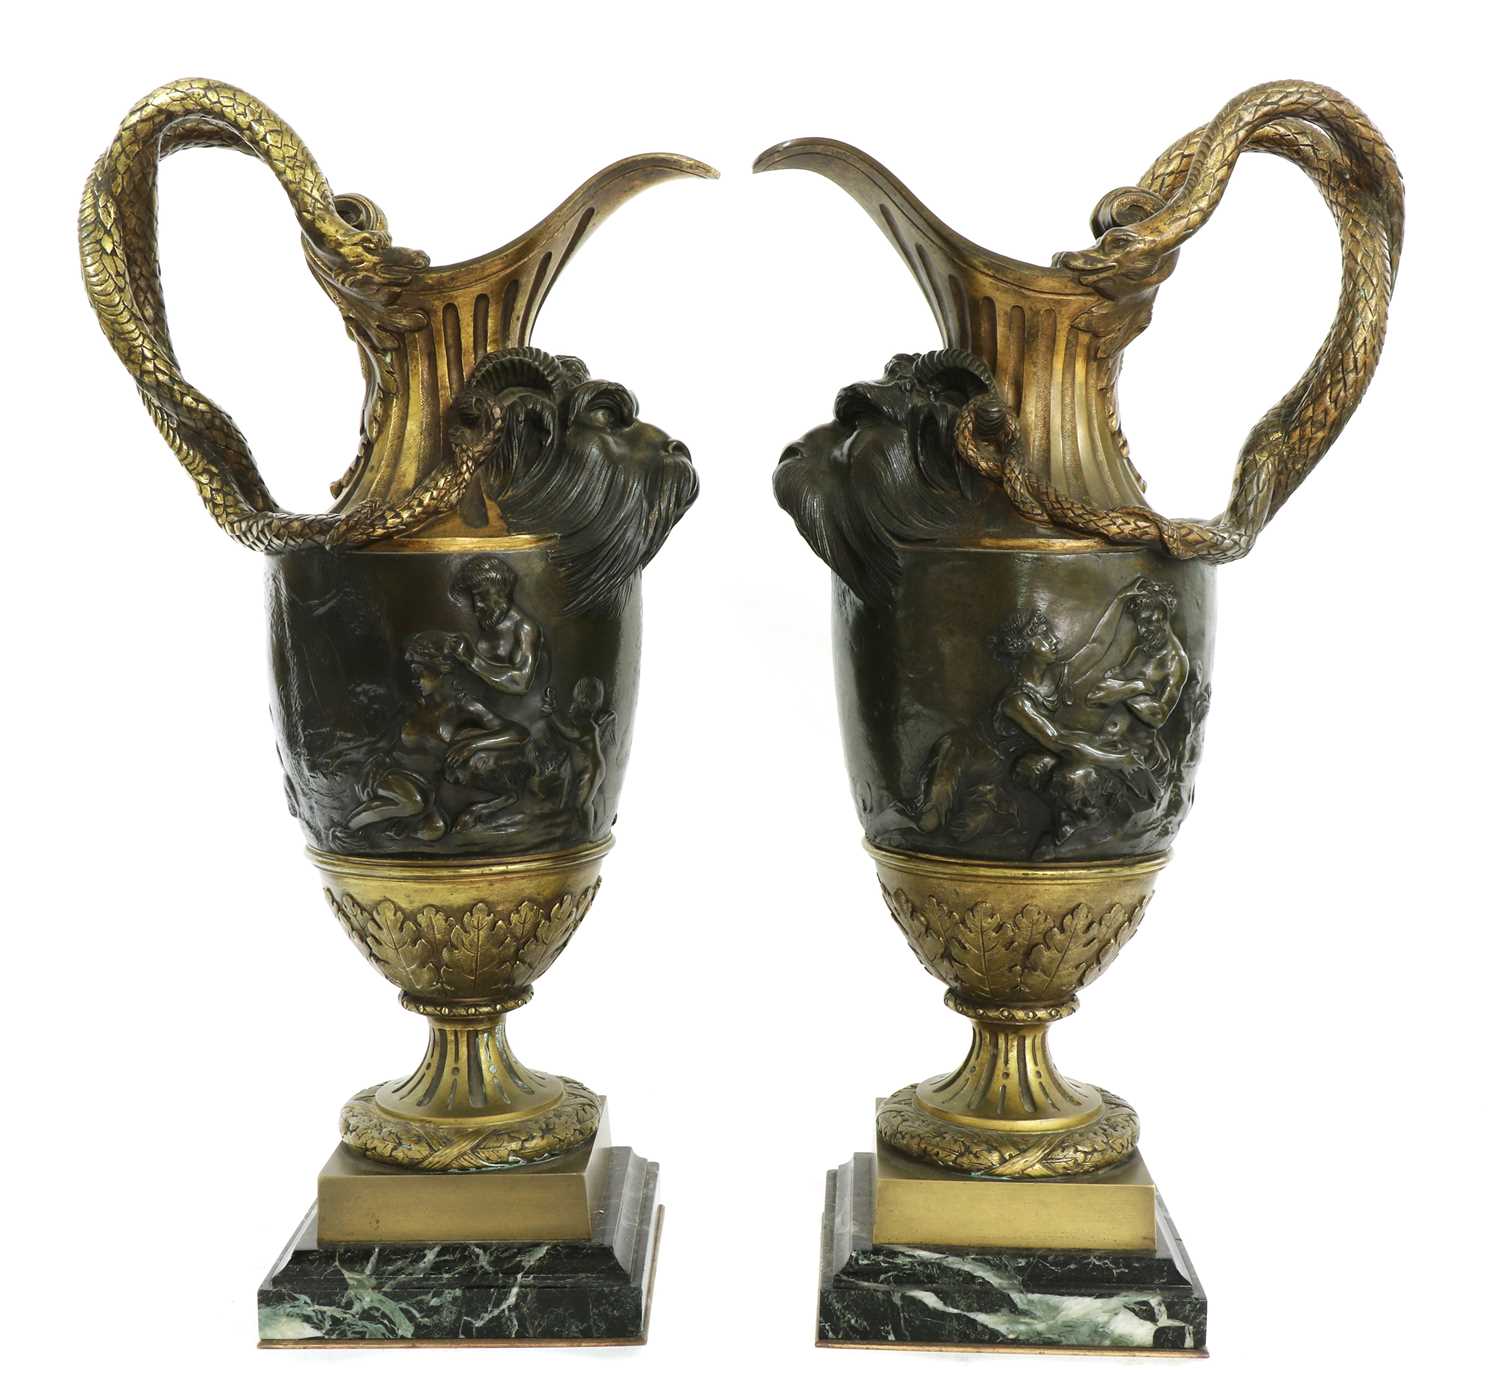 Lot 481 - A pair of large gilt-bronze and bronze ewers